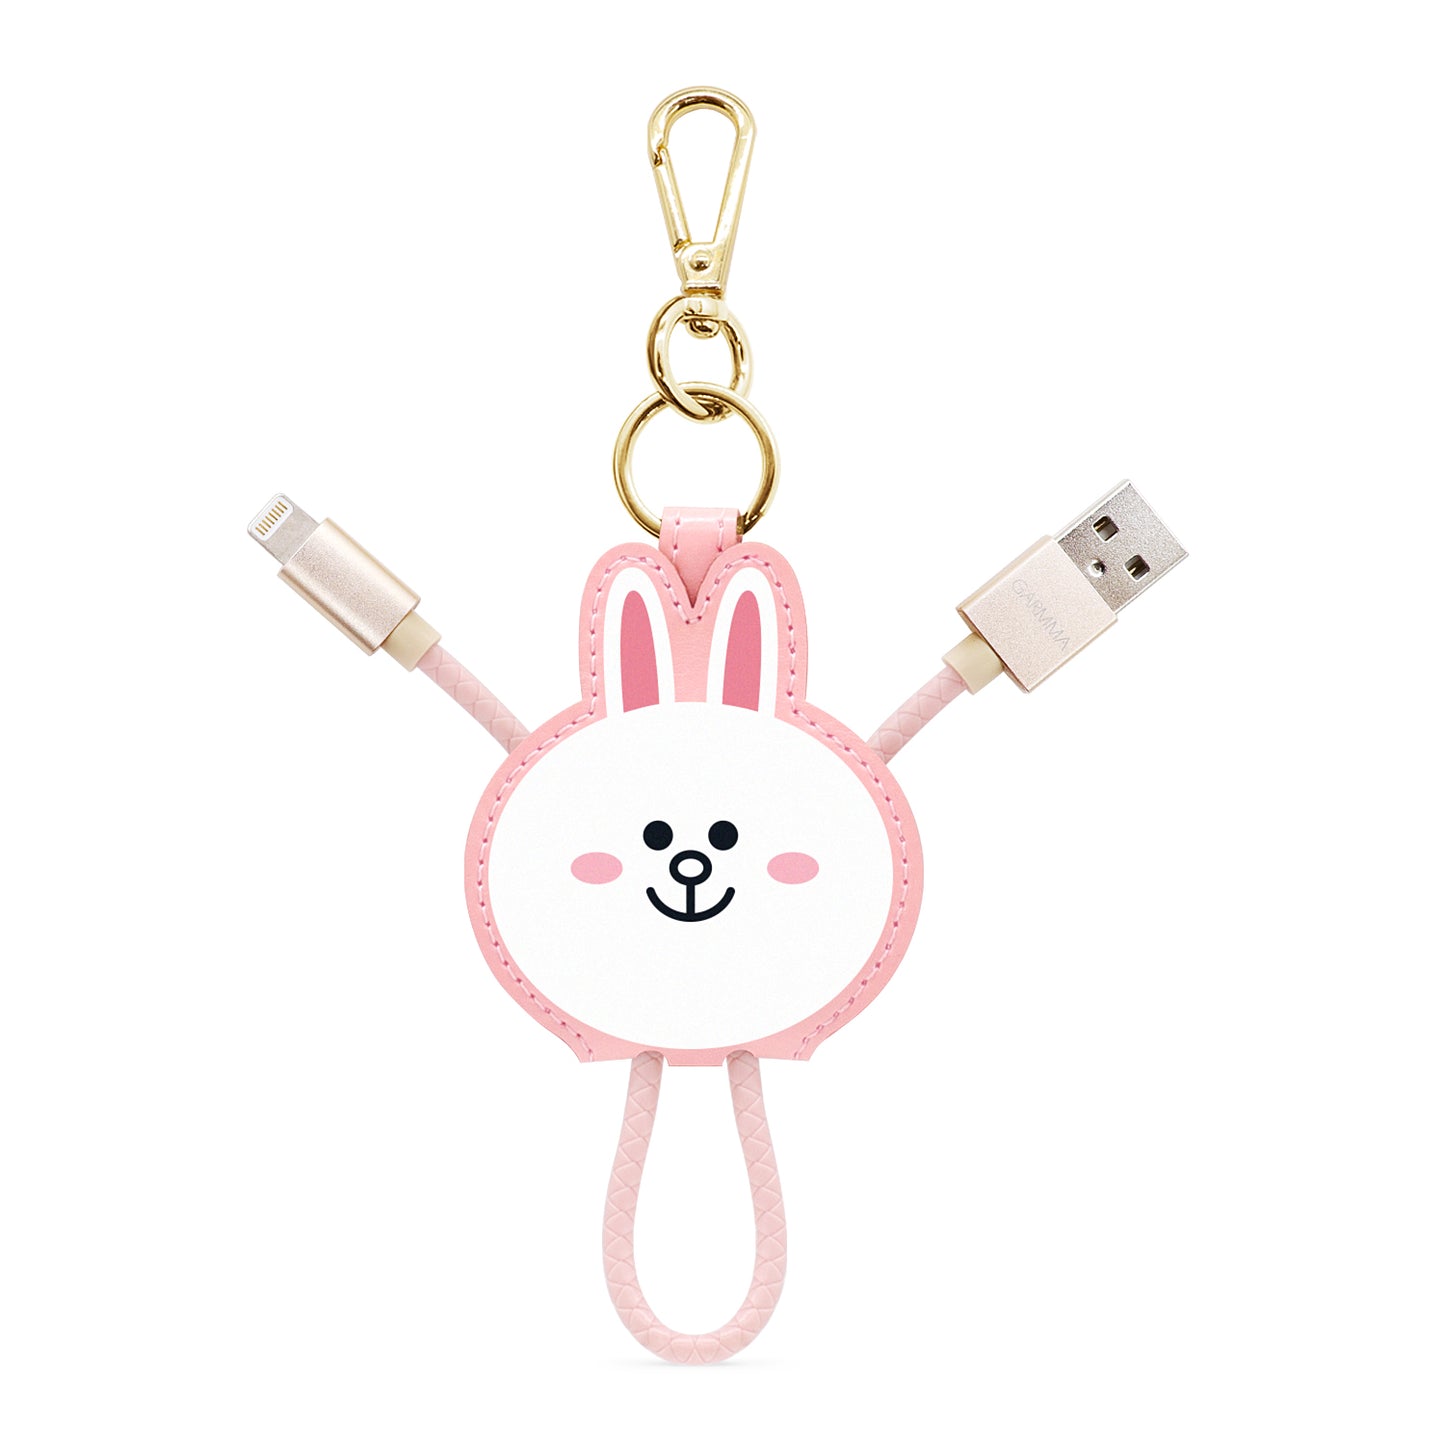 GARMMA Line Friends Apple MFI Certified Key Chain Leather USB Lightning Cable